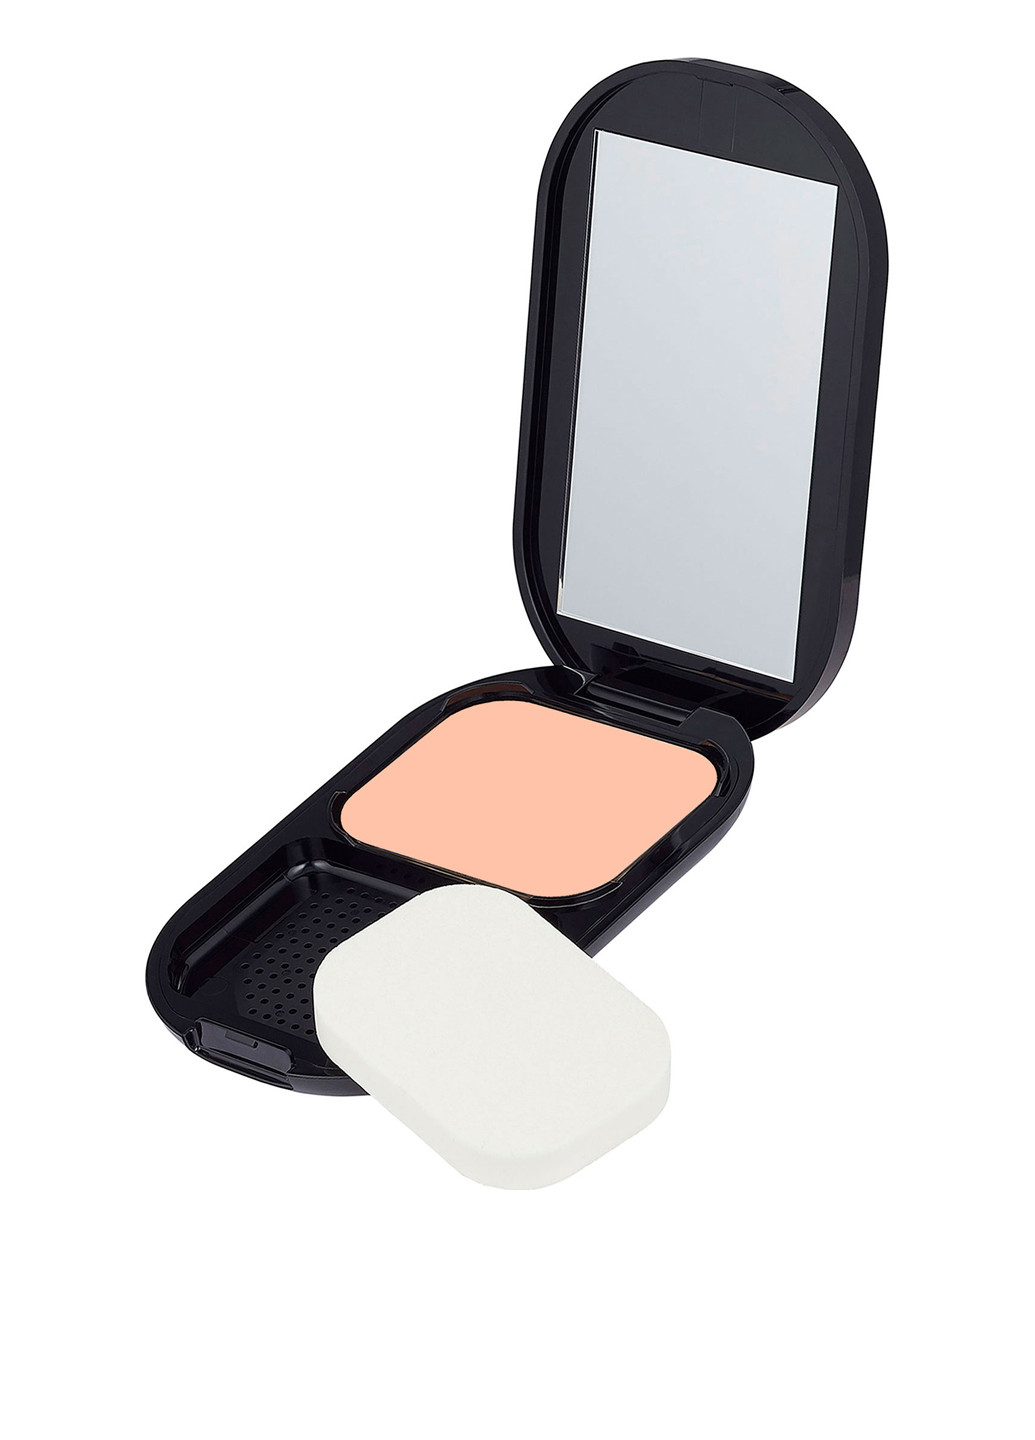 Пудра FACE FINITY №035 pearl beige, 10 г Max Factor (175250563)